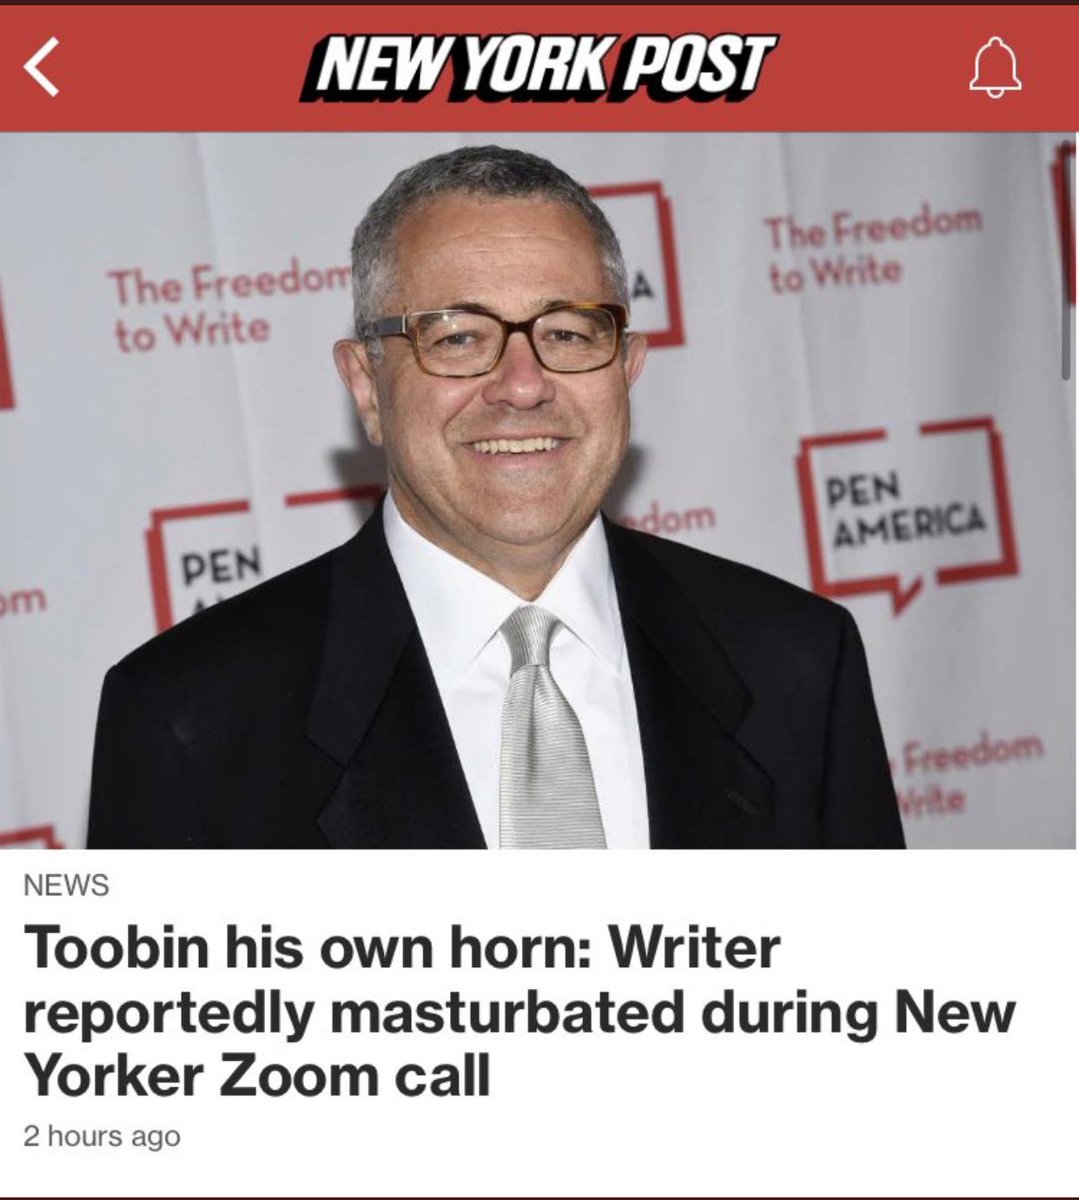 business - New York Post The Freedom to Write The Freedom to Write edom Pen America Pen om Freedom News Toobin his own horn Writer reportedly masturbated during New Yorker Zoom call 2 hours ago